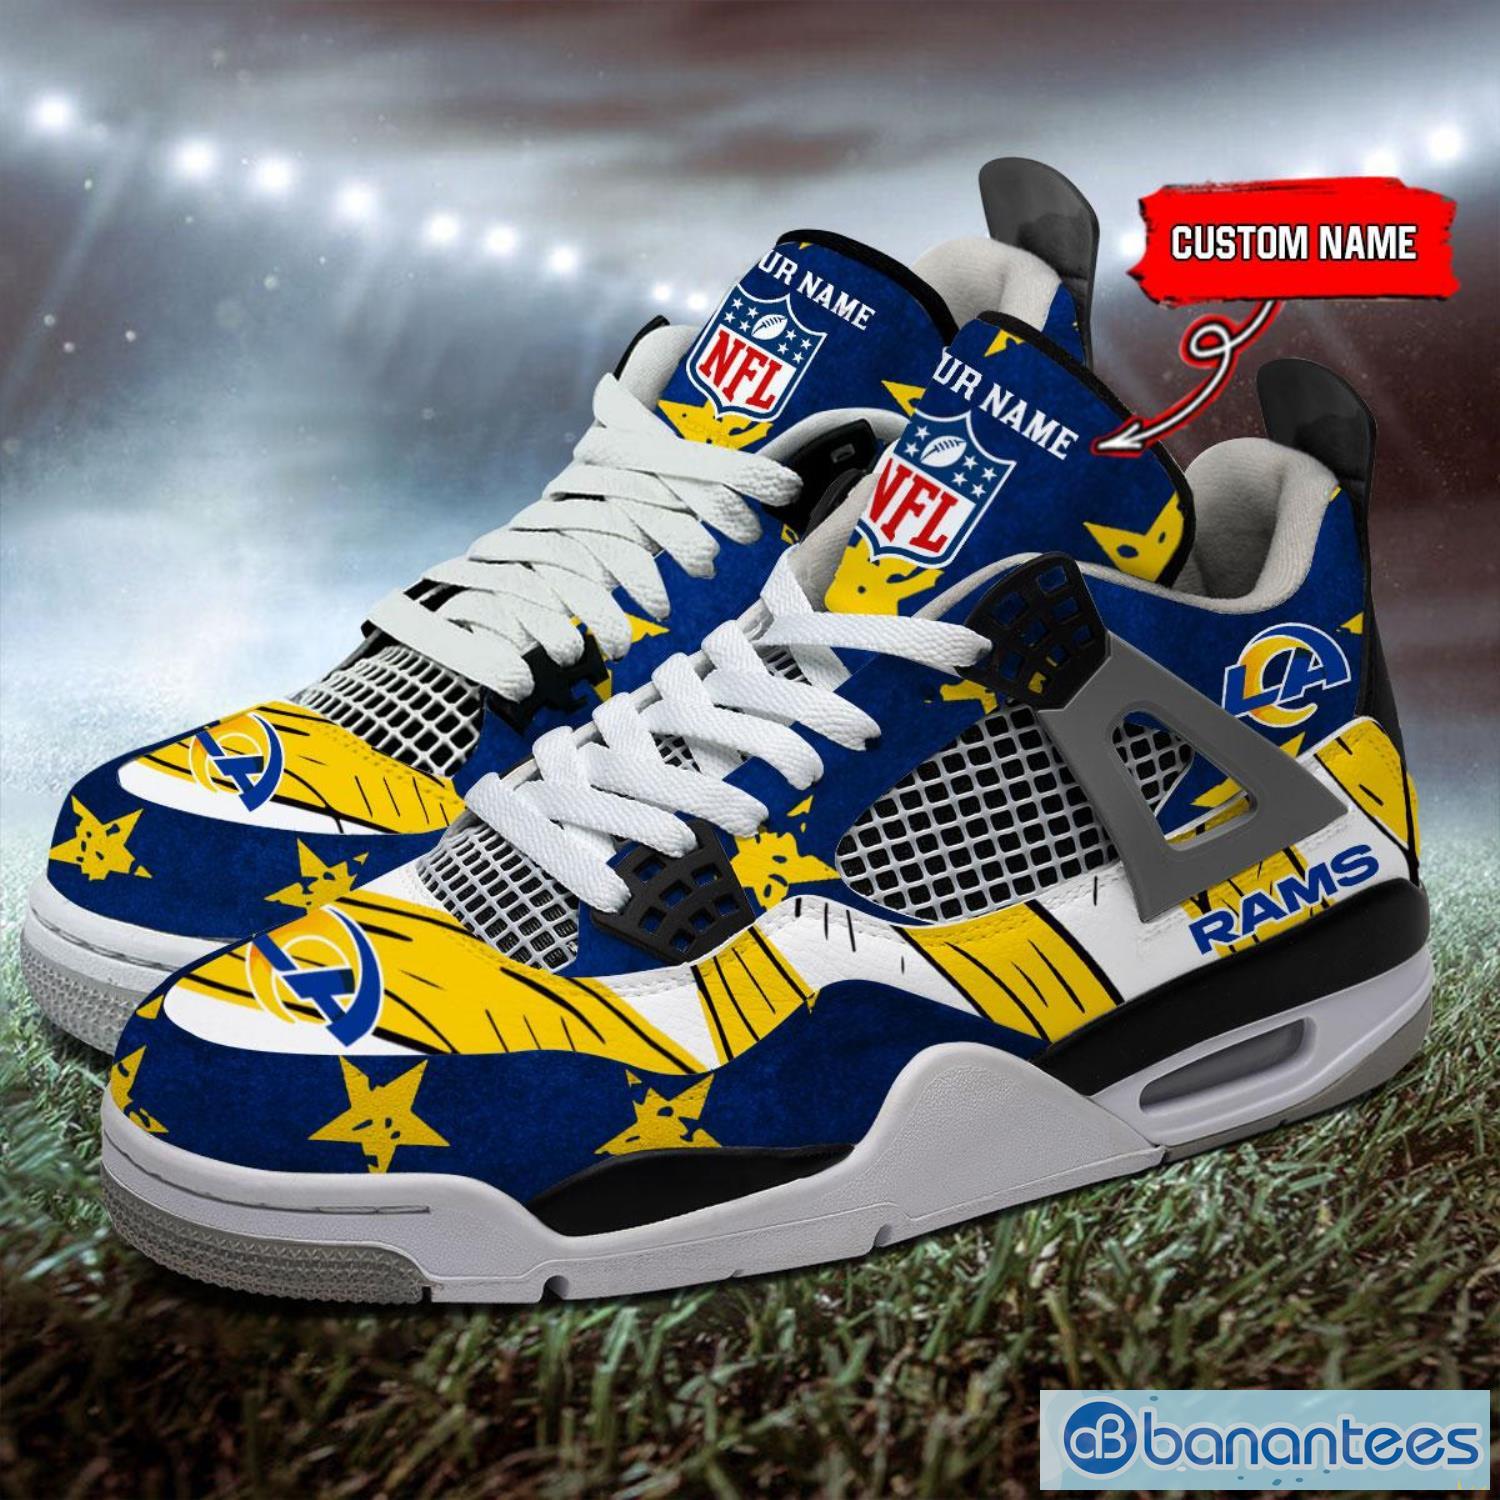 Personalized Name Los Angeles Rams Personalized Air Jordan 4 Sneakers Shoes New Design Product Photo 1